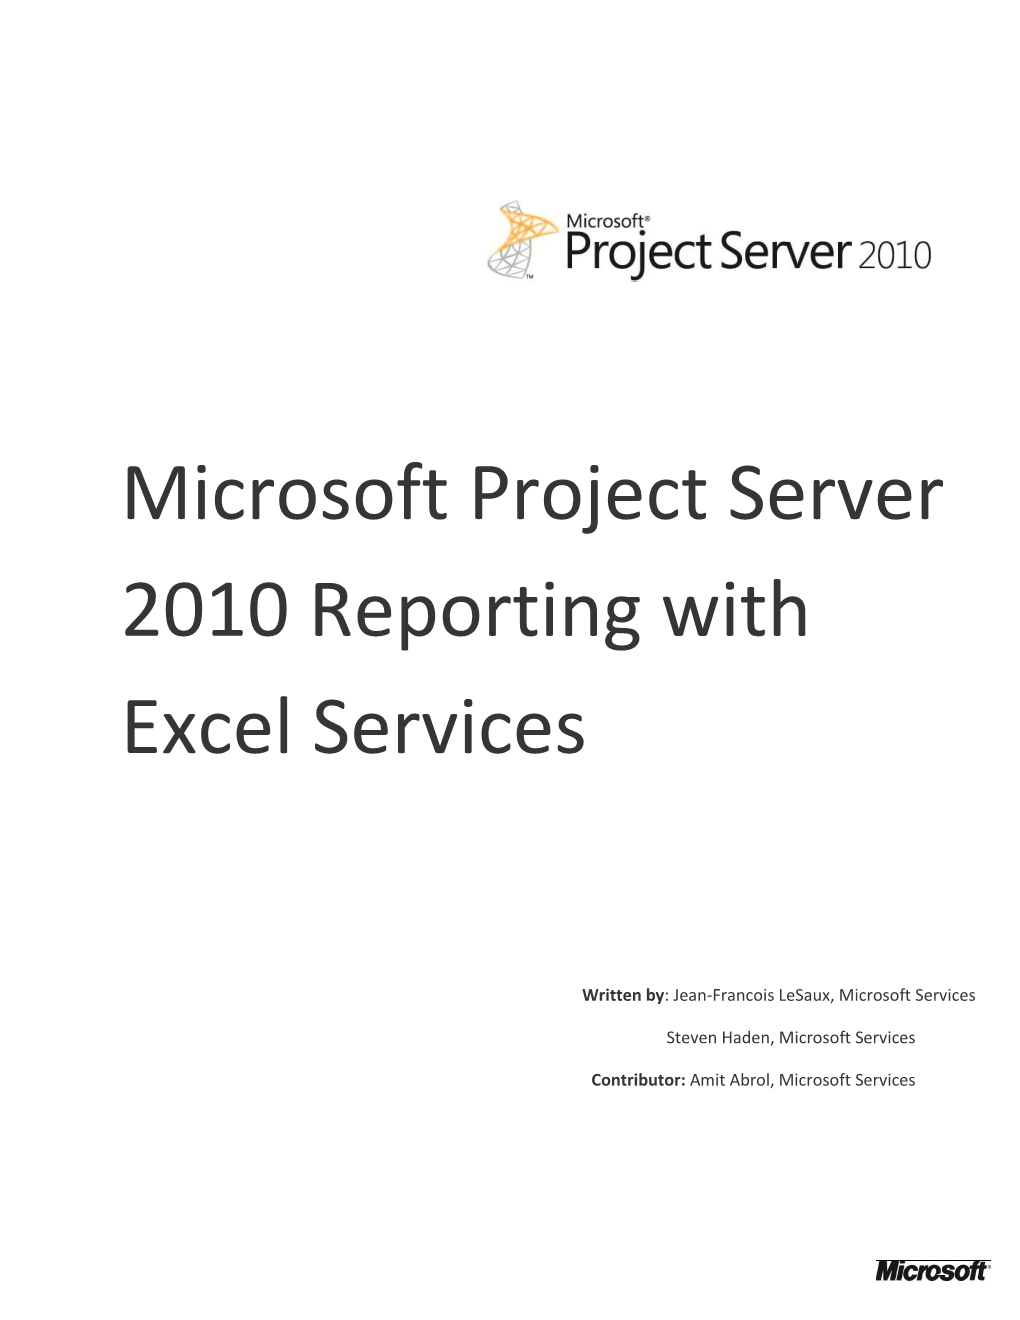 Microsoft Project Server 2010 Reporting with Excel Services